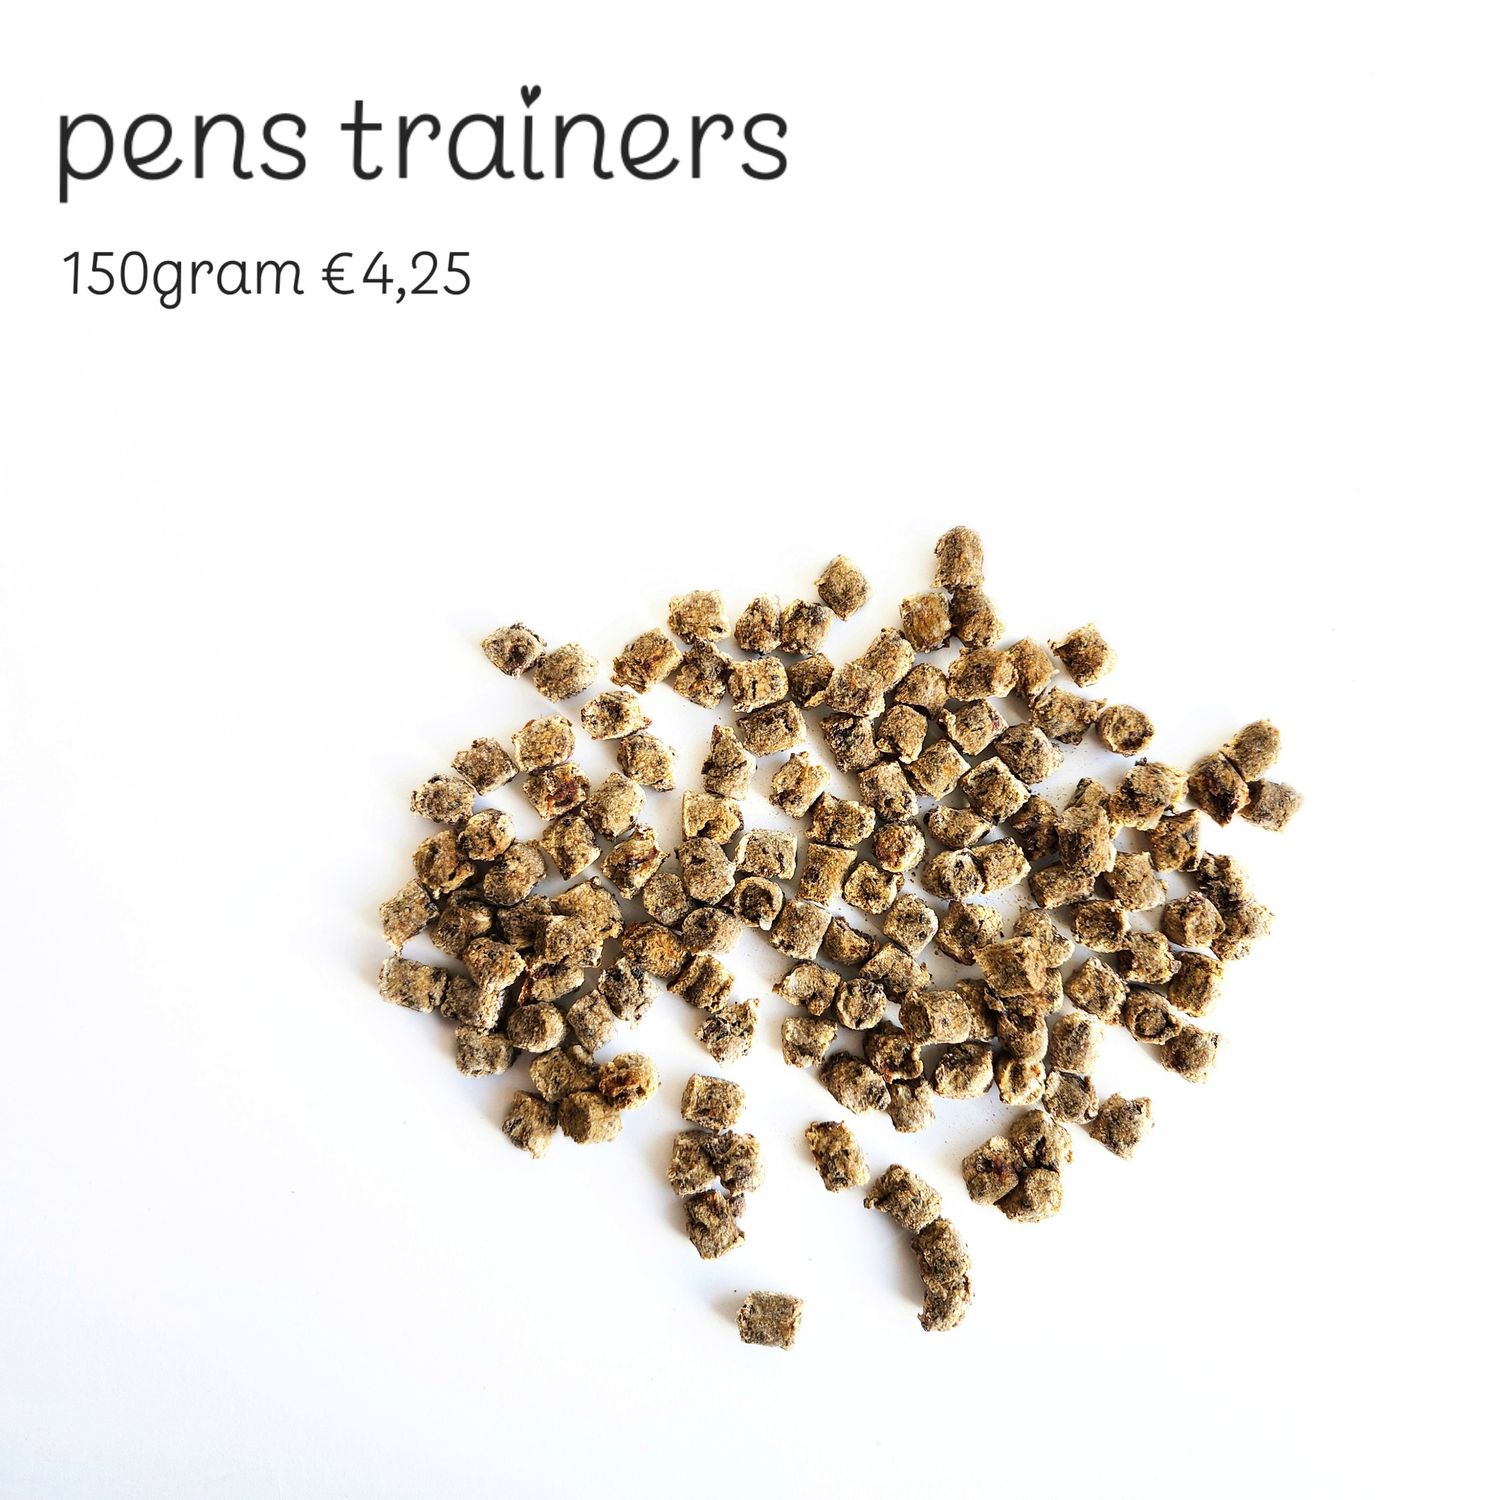 Pens trainers